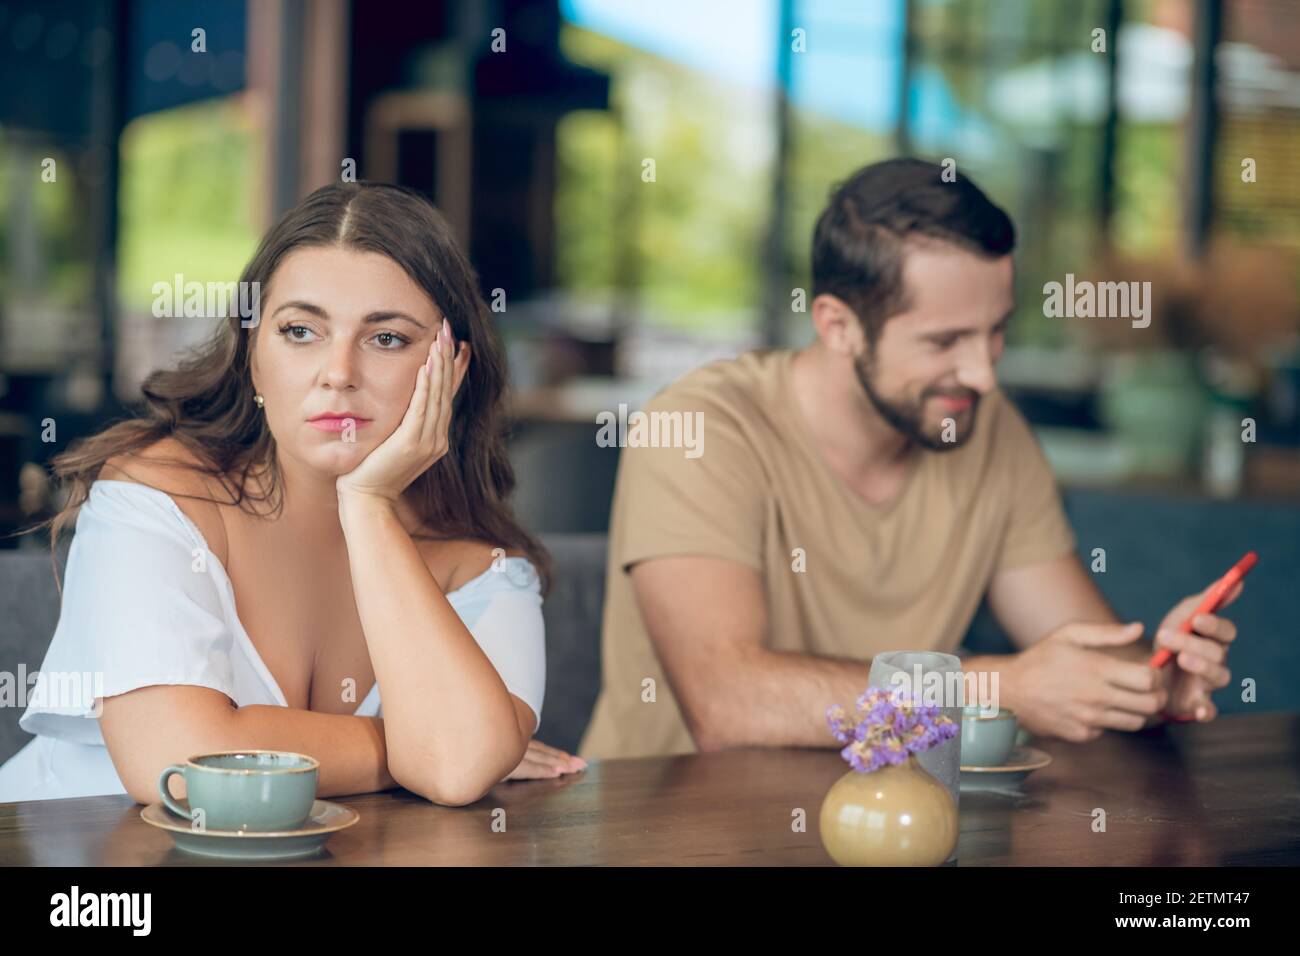 Sad turning away woman and cheerful man with smartphone Stock Photo